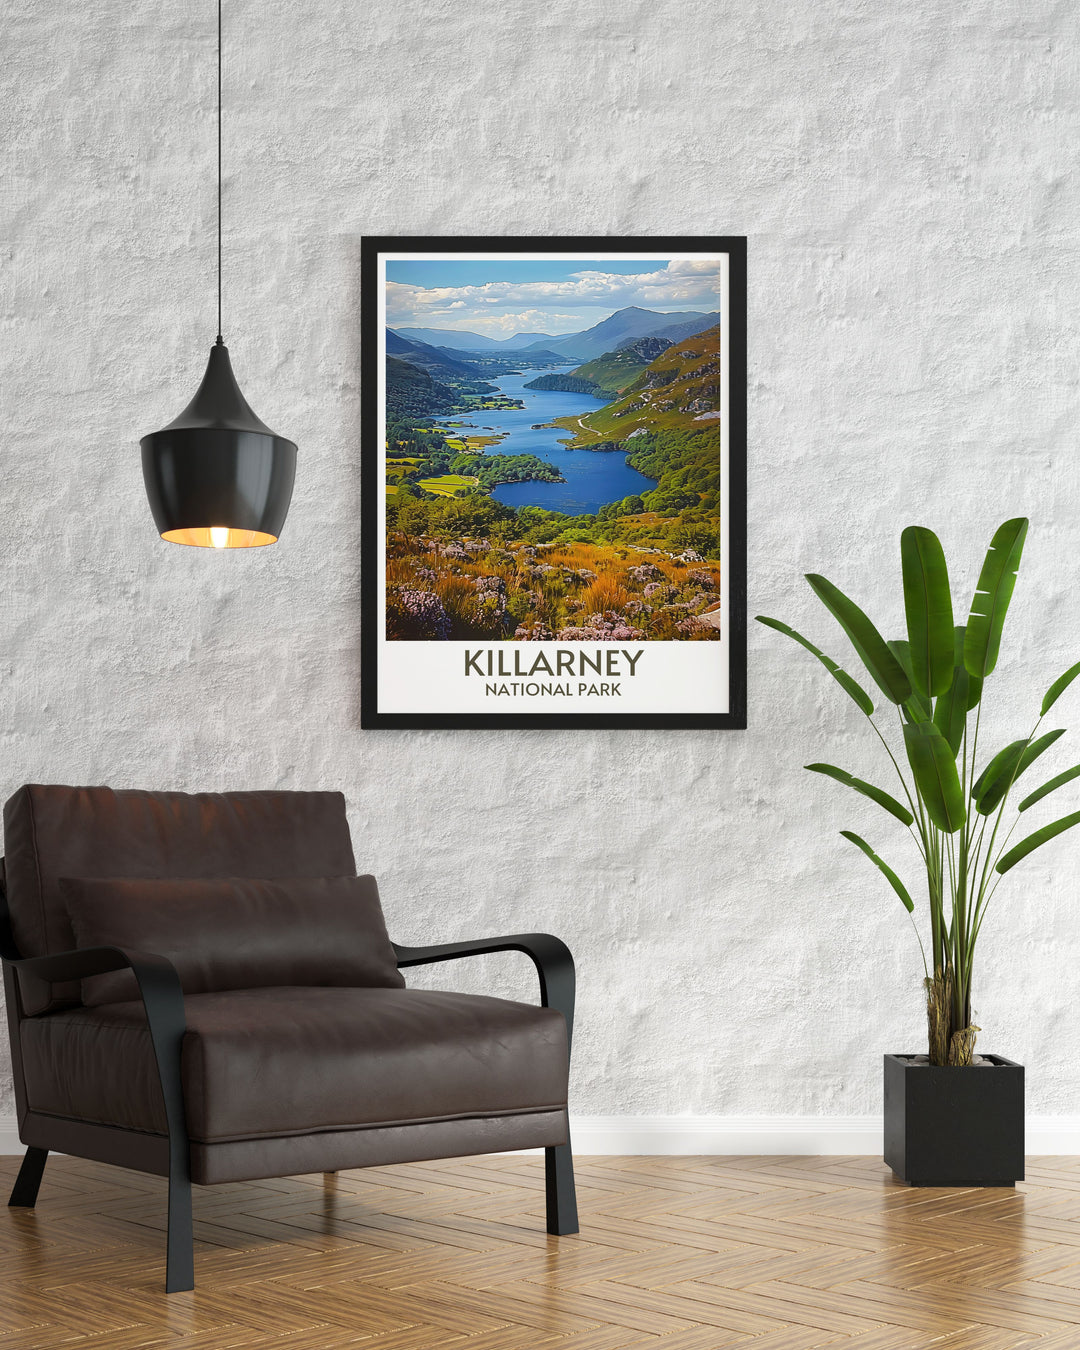 Custom print featuring detailed imagery of Killarneys natural beauty, personalized for those who treasure Irish landscapes